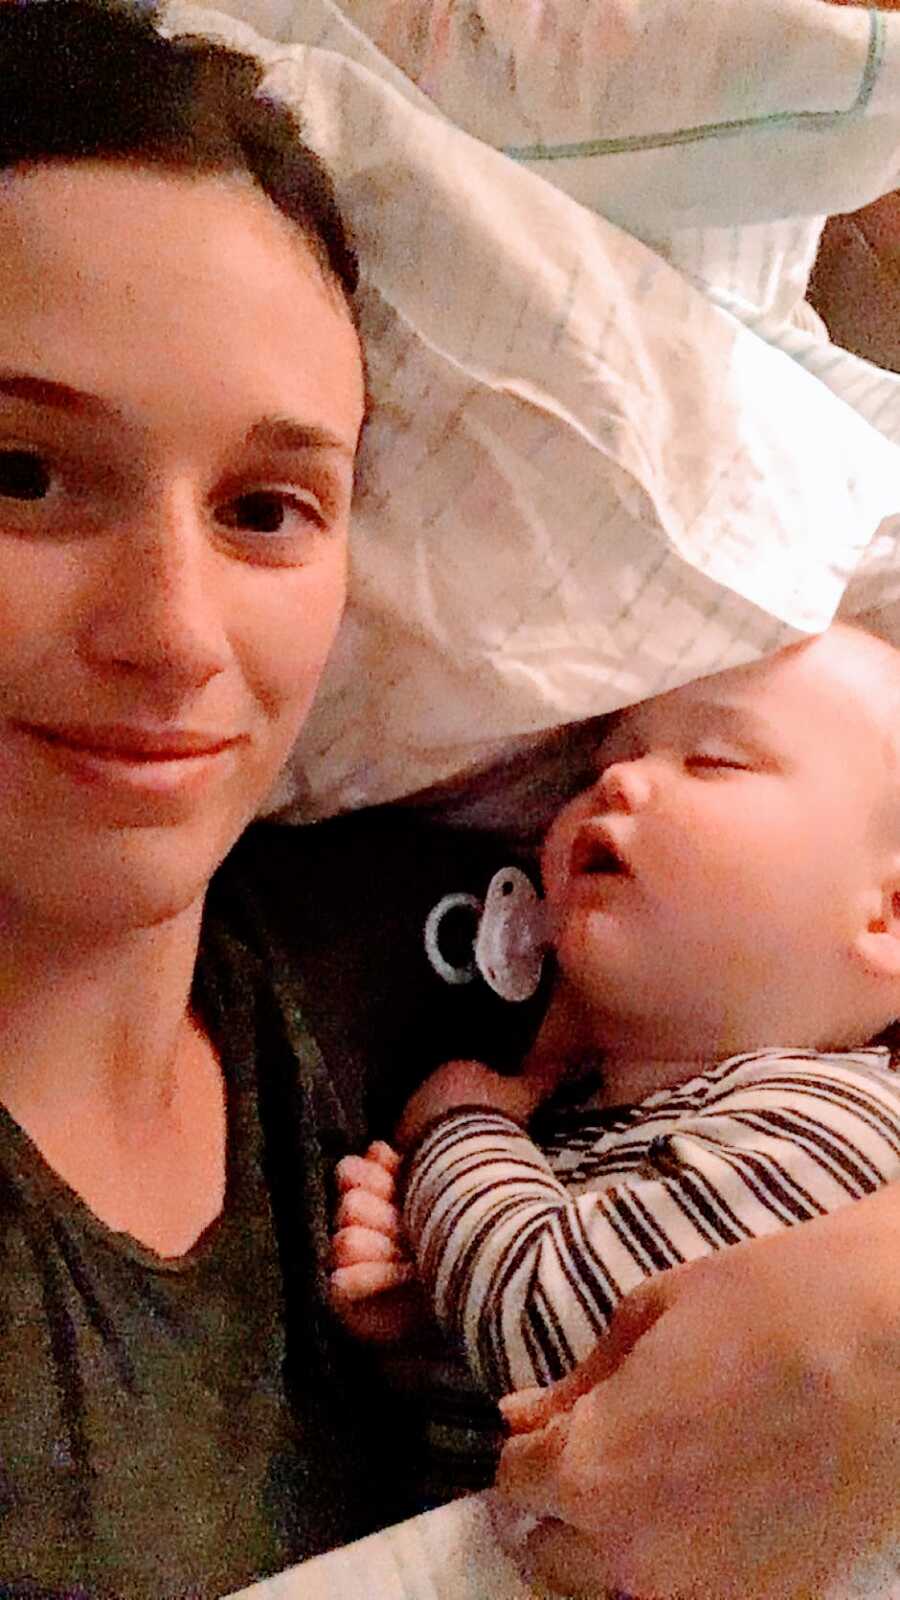 Woman dating a narcissistic sociopath cuddles with her young son in bed